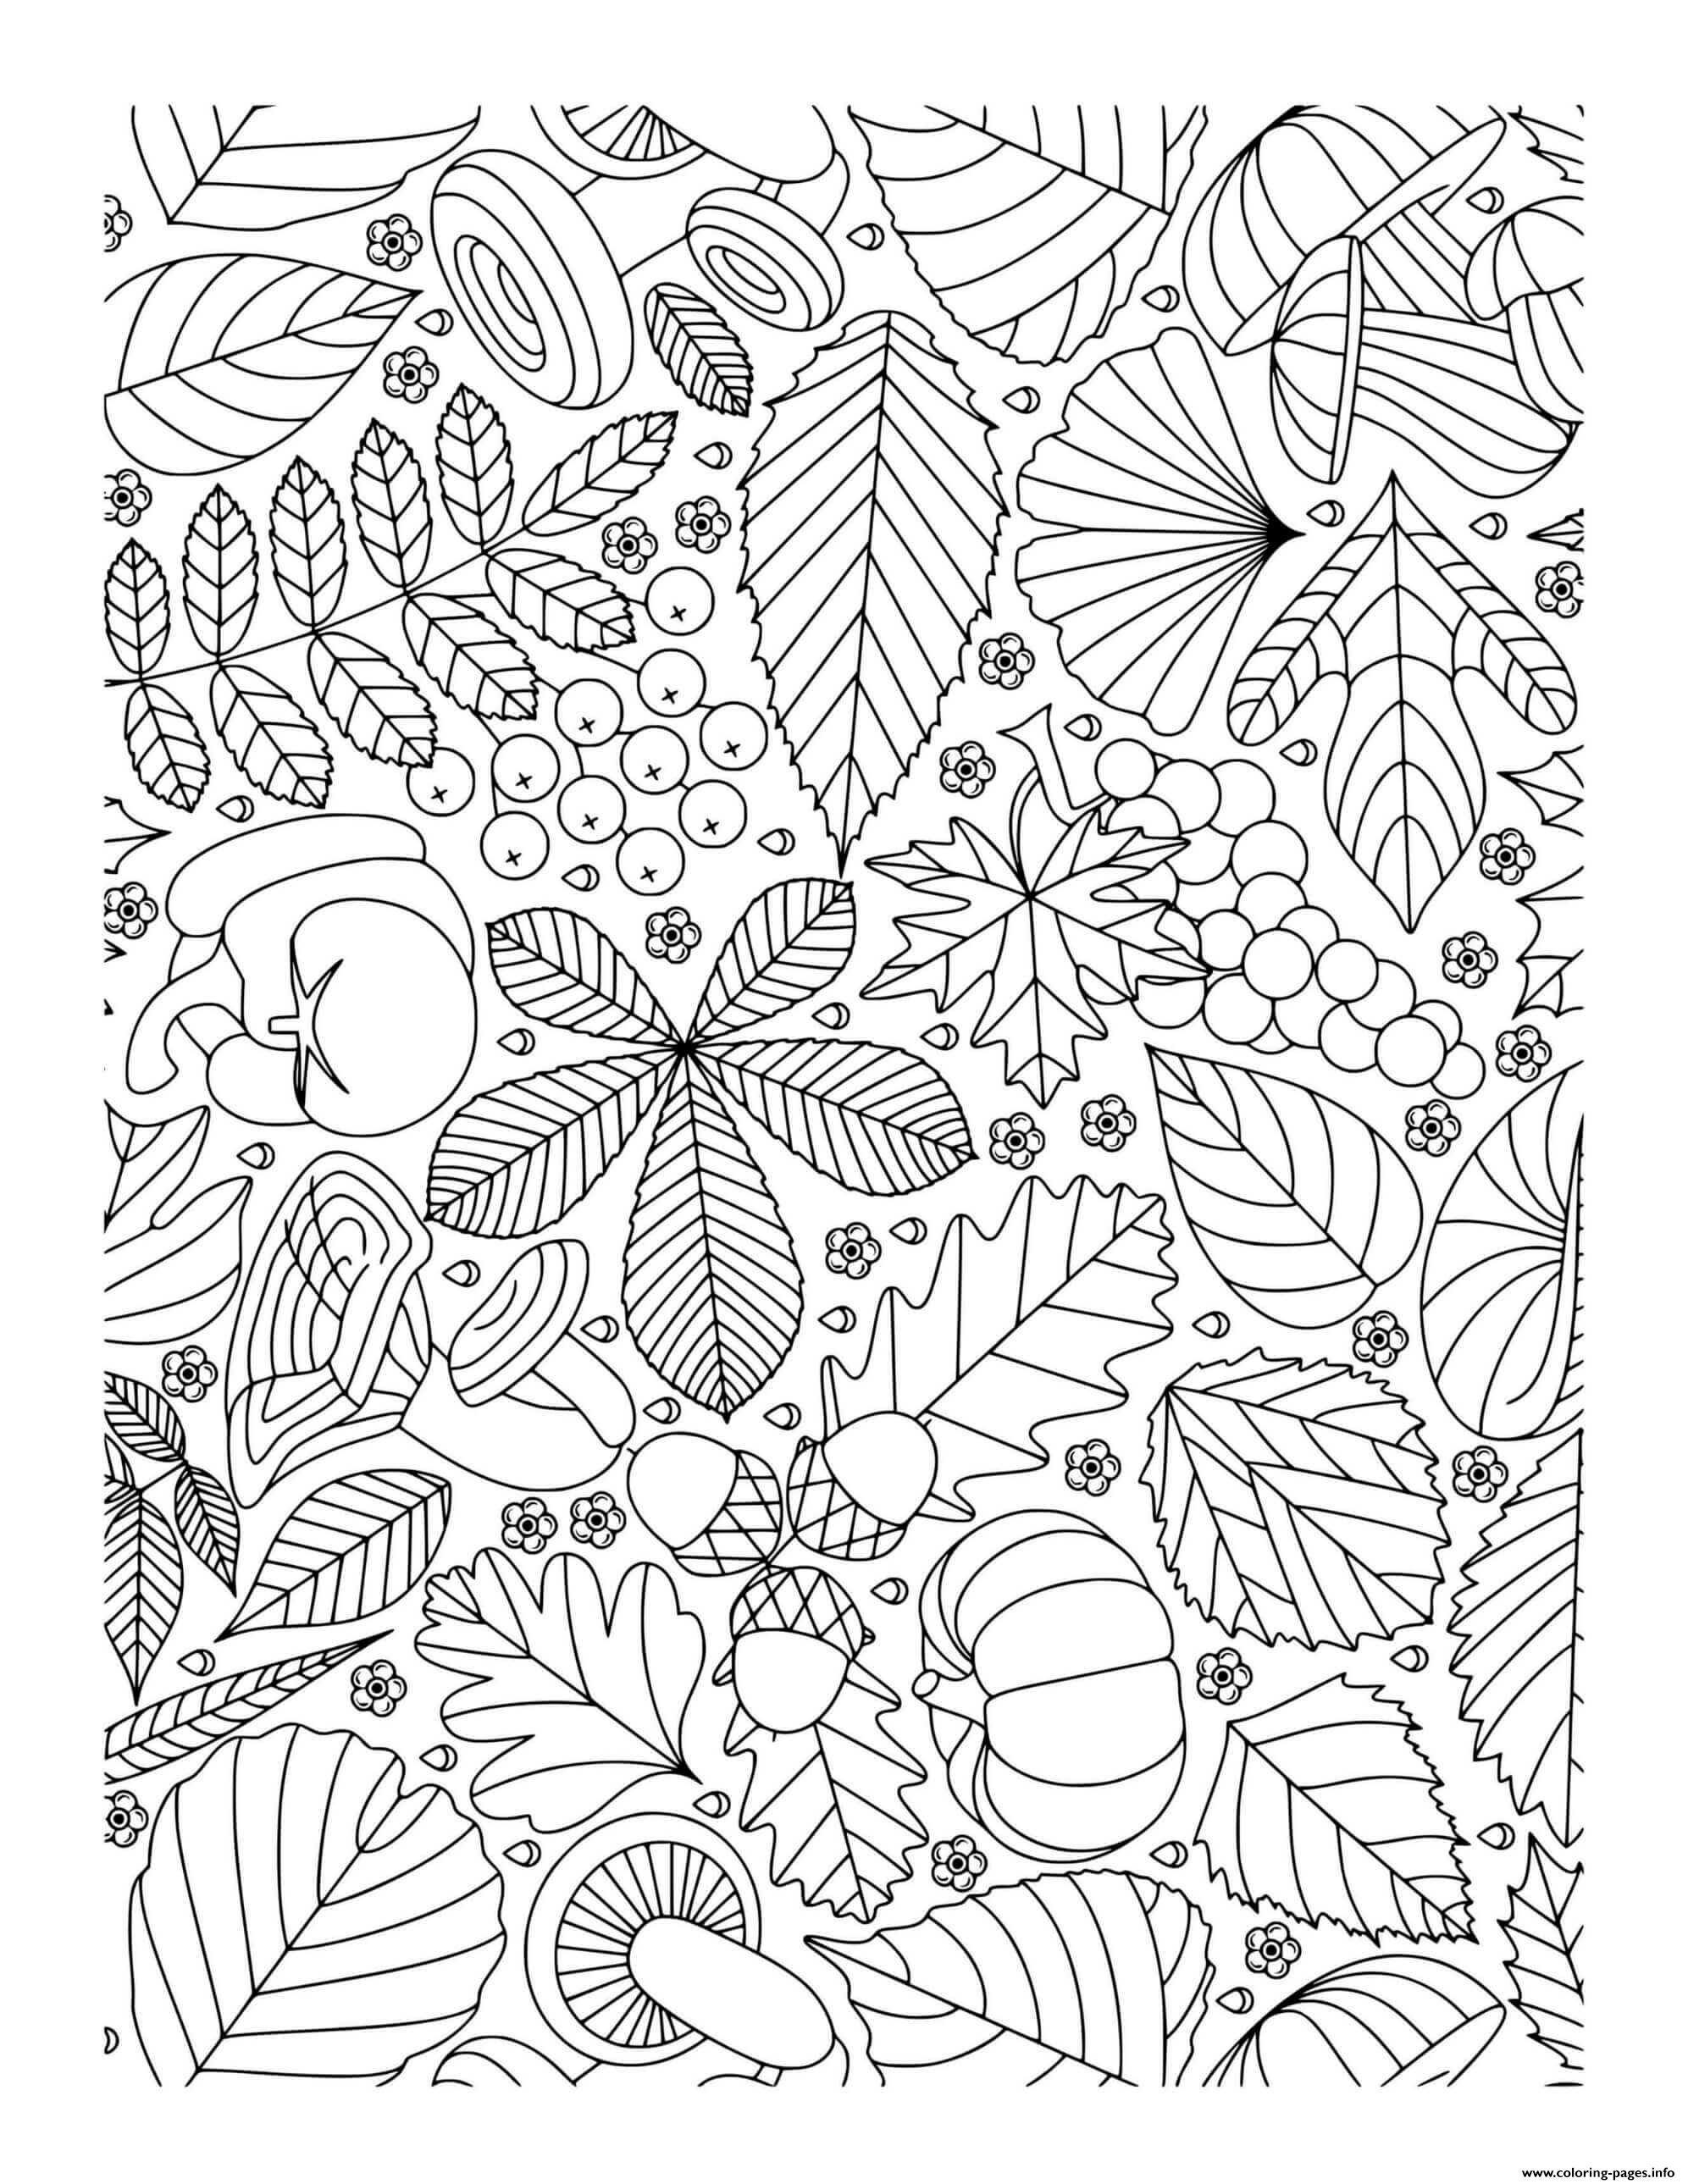 Fall Autumn Doodle For Adults Leaves Mushrooms Grapes Pumpkin Coloring